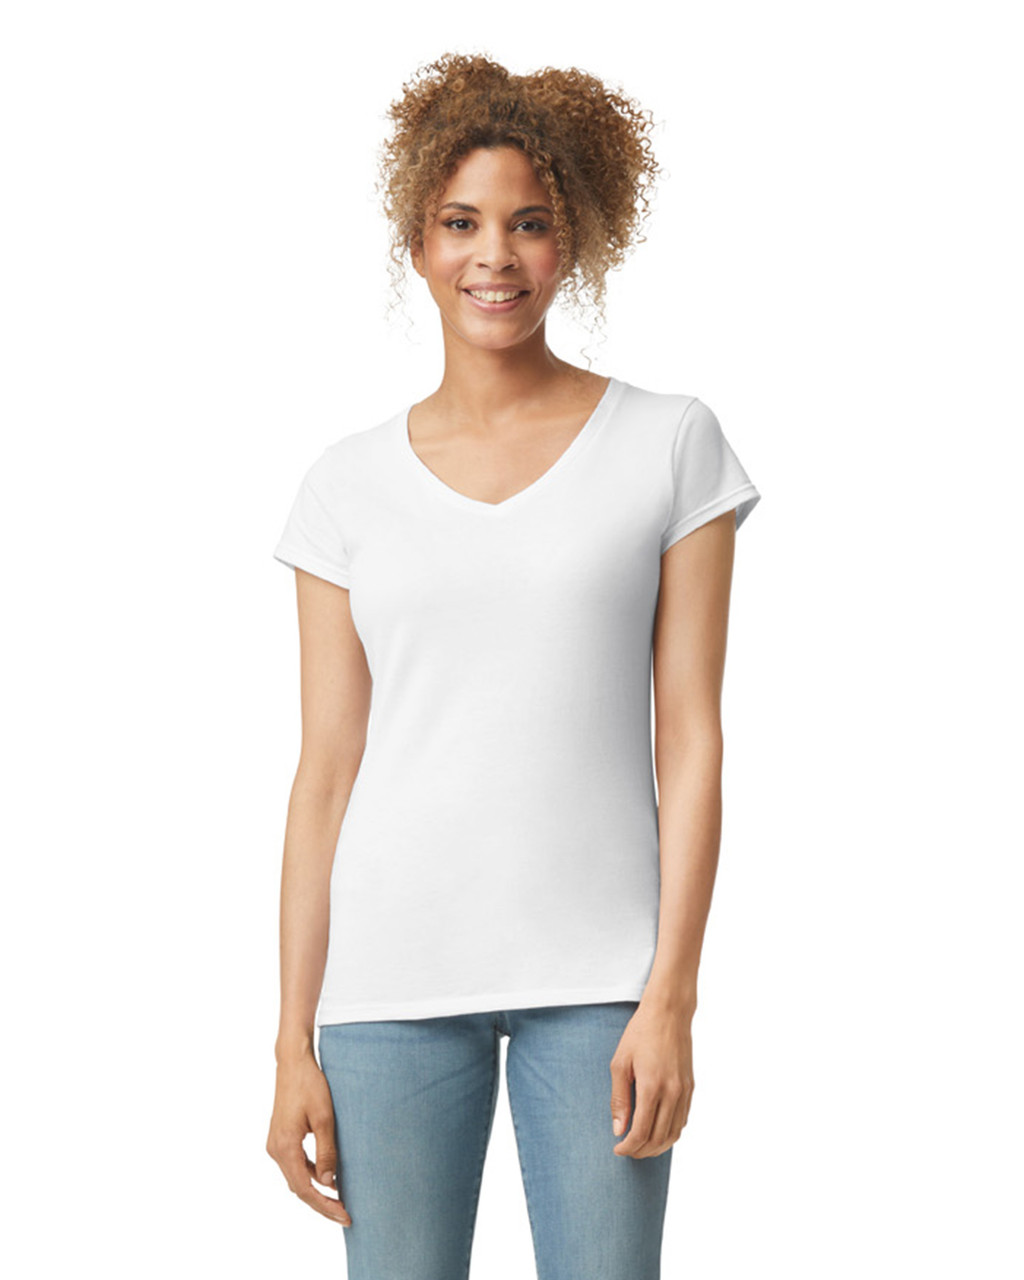 PLAIN WHITE USA T-SHIRT-MEMORABLE GIFT- AMERICAN V- NECK WHITE T-SHIRT-TOP QUALITY-LOWEST PRICE GAURANTEED-DO NOT MISS THIS CHANCE-FREE HOME(POST OFFICE) DELIVERY-ART NO. GL41V00VL-REA 27%